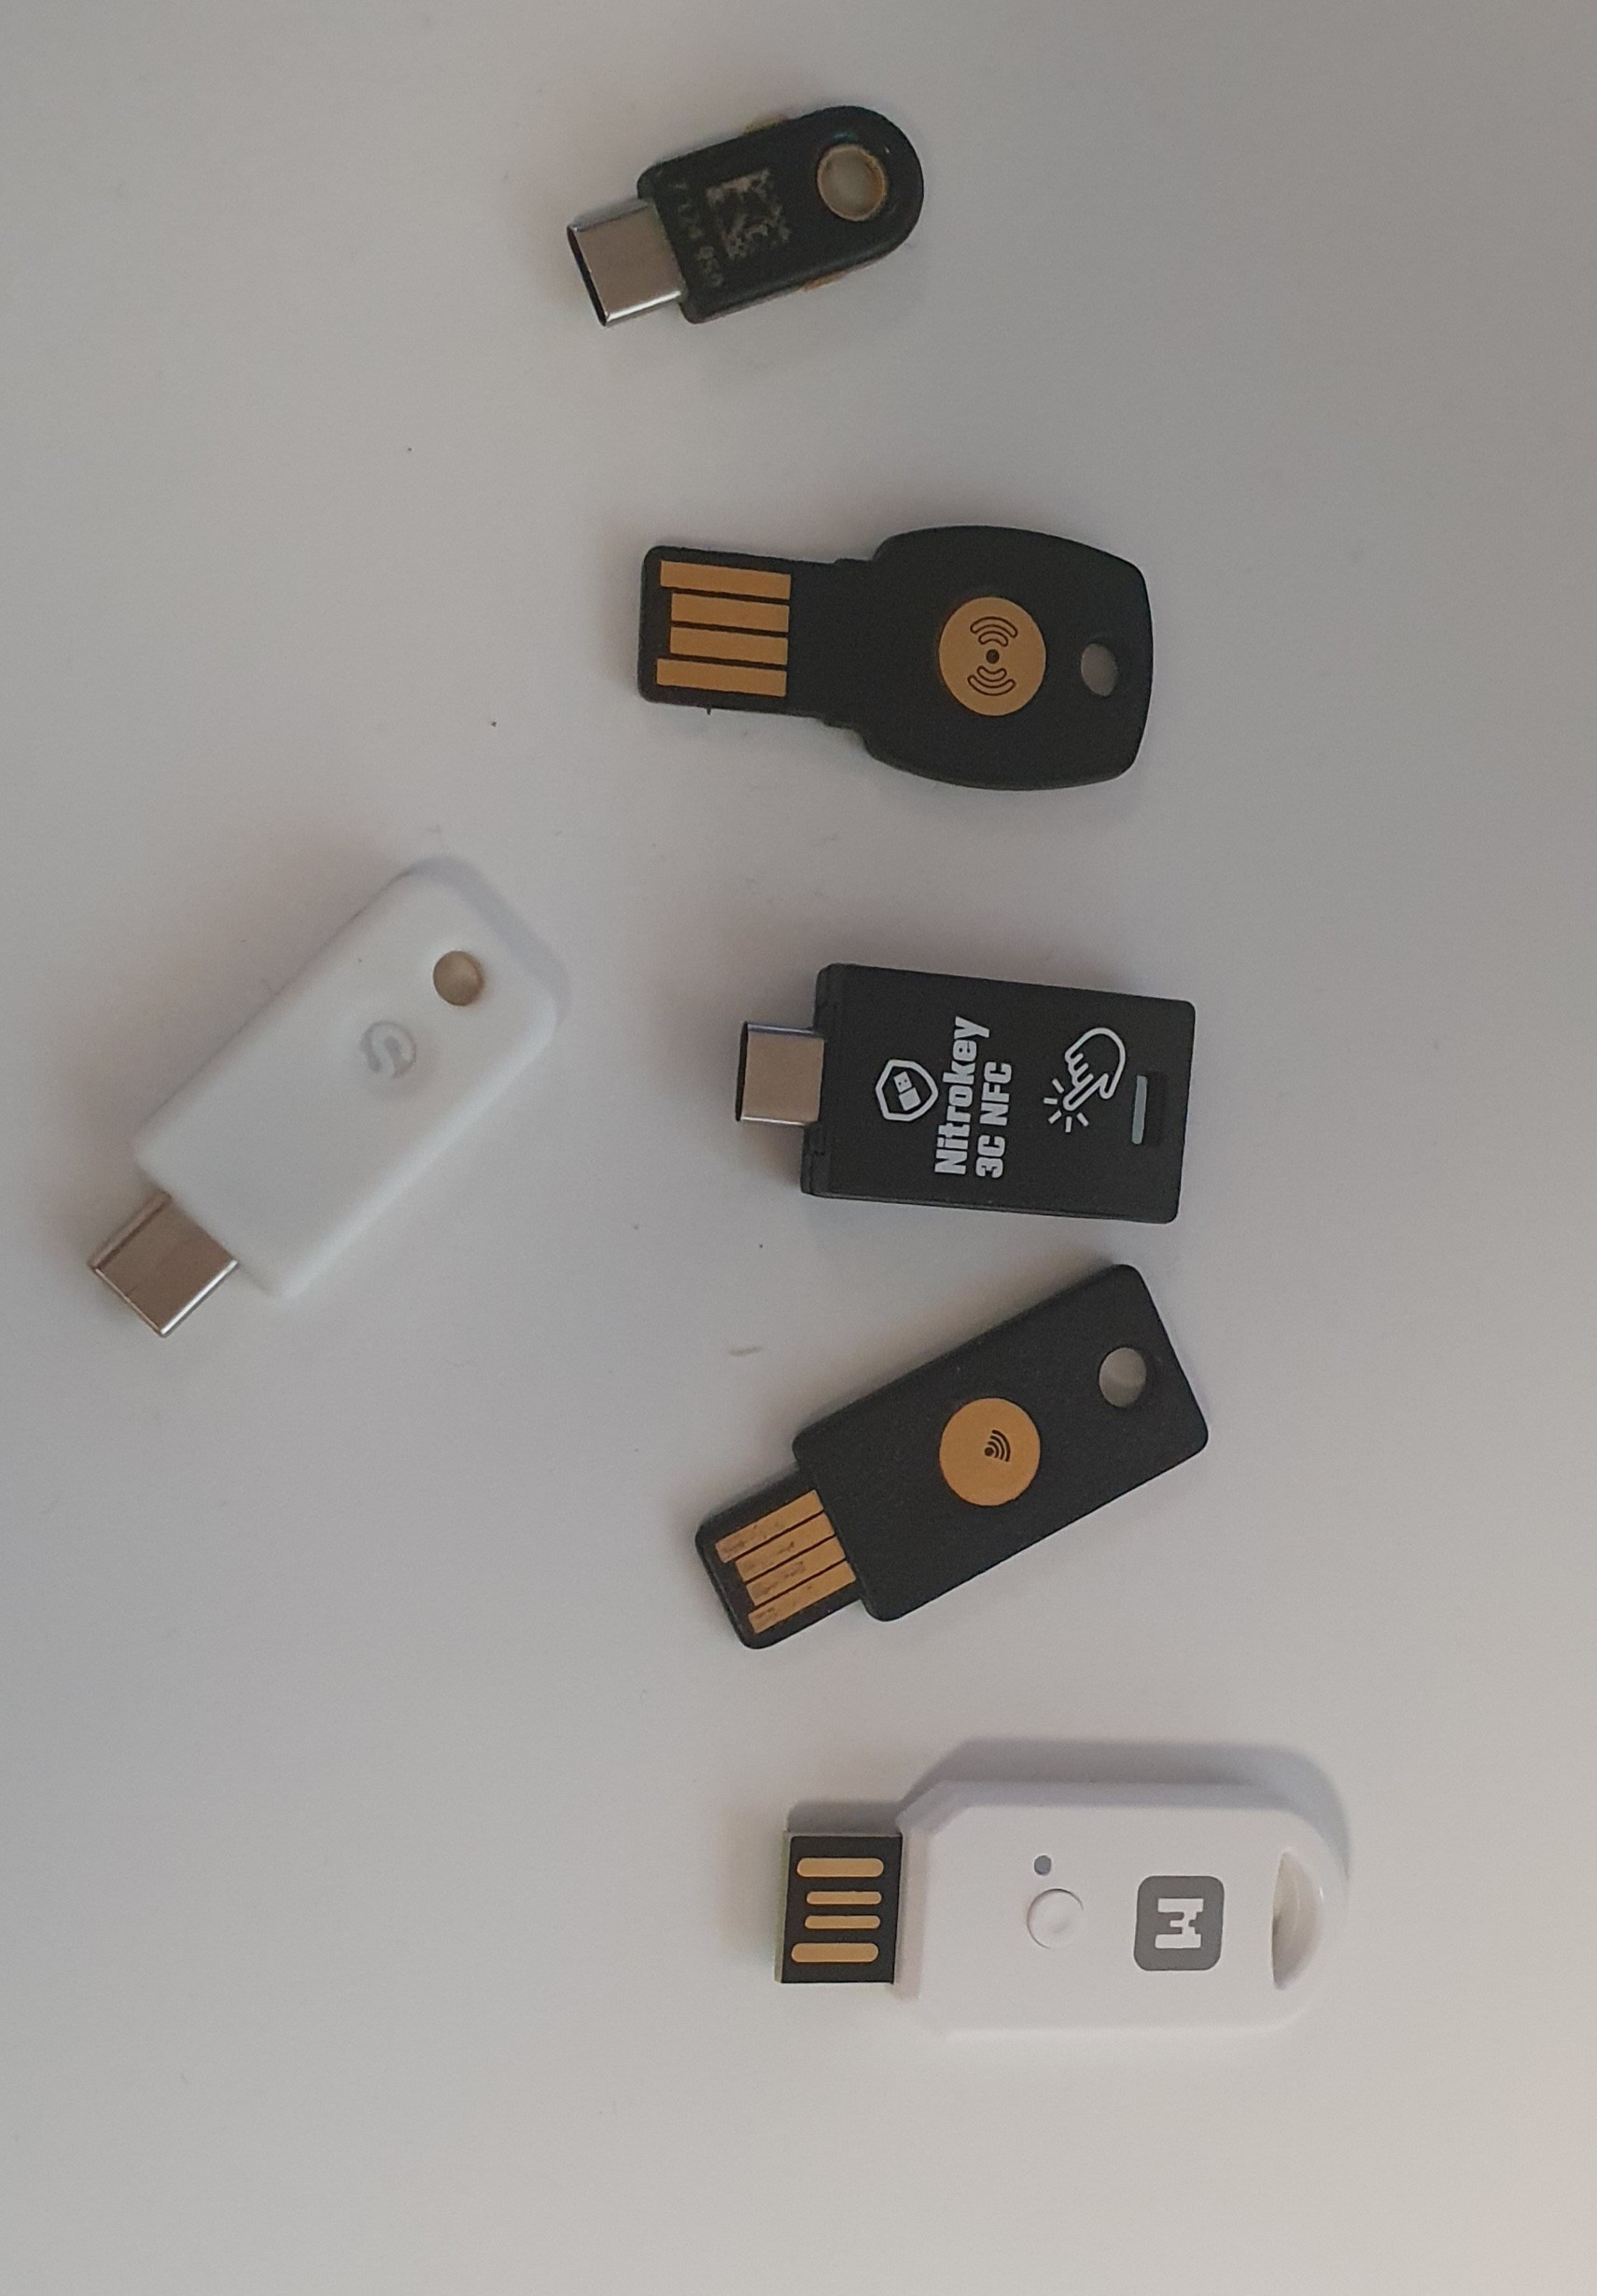 A collection of USB security tokens on a table